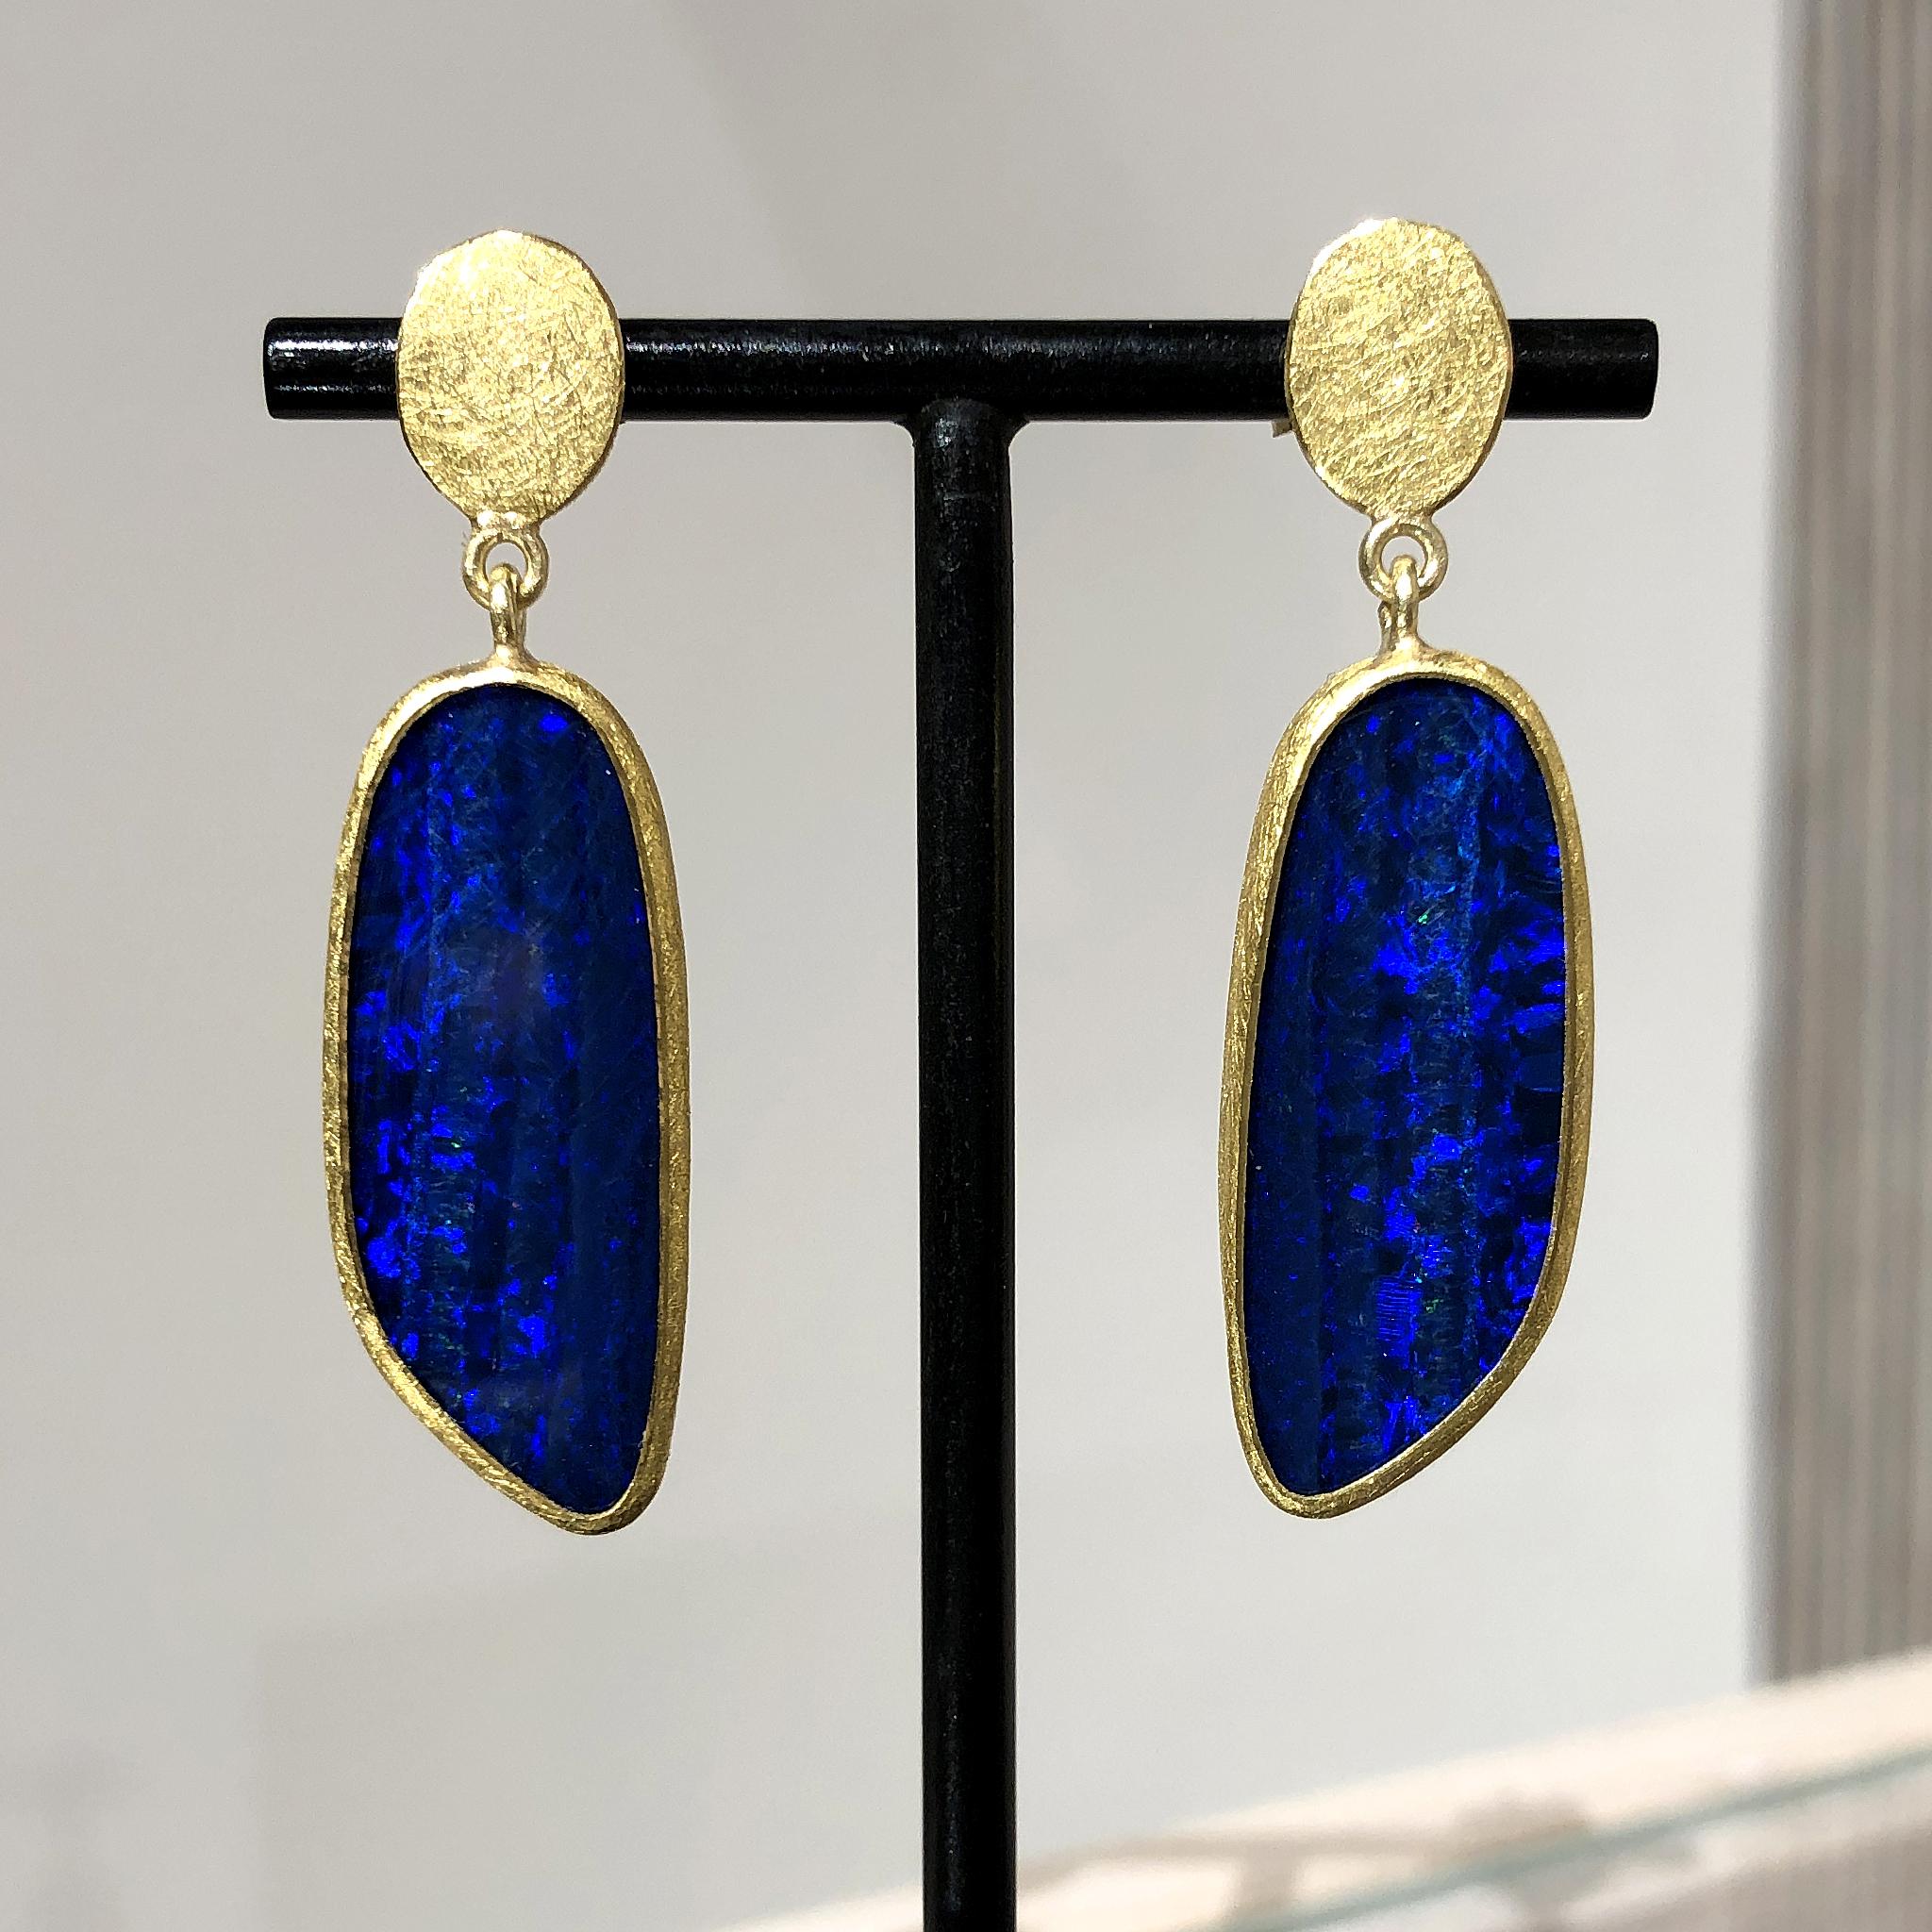 Drop Earrings handmade by acclaimed jewelry artist Petra Class in signature finely-textured 22k yellow gold featuring a beautifully matched pair of deep violet blue Australian opal doublets with primary violet, blue, and green flash and flickers of